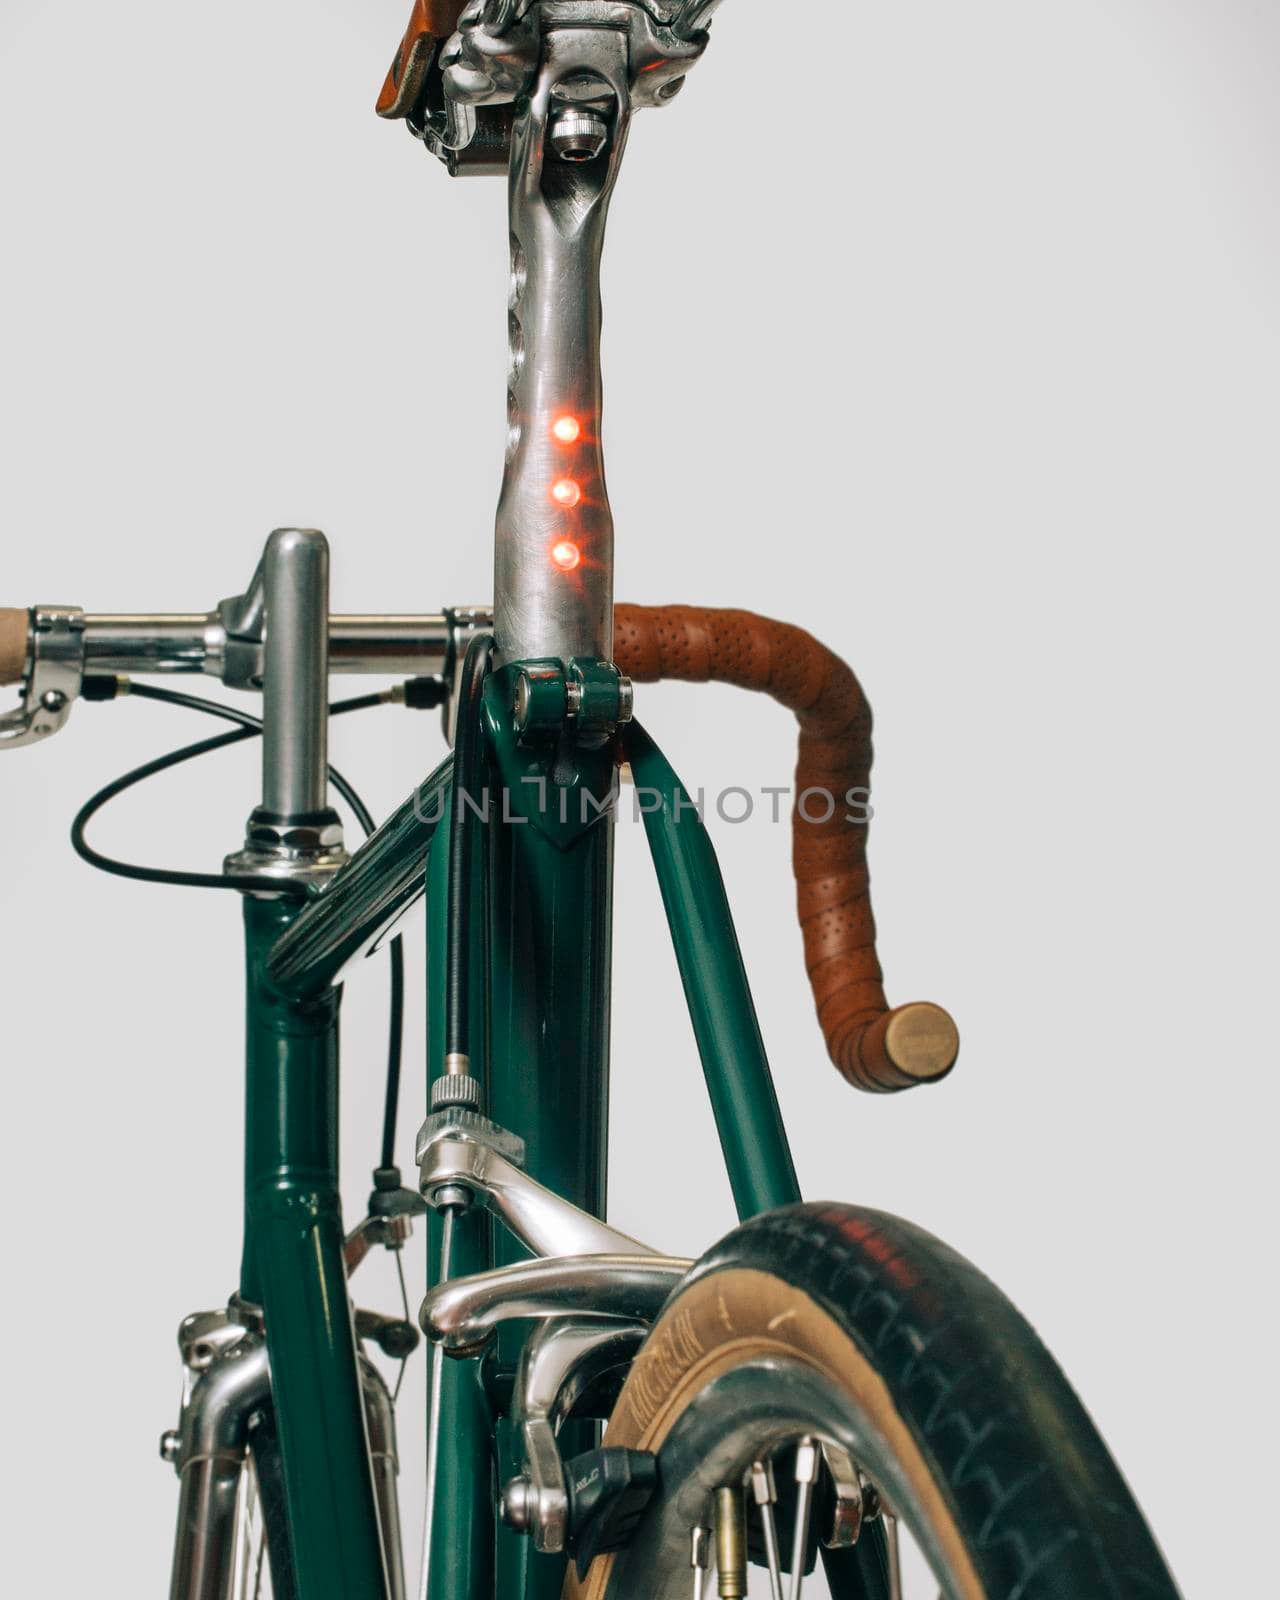 Vintage classic bike, white background by Maurese